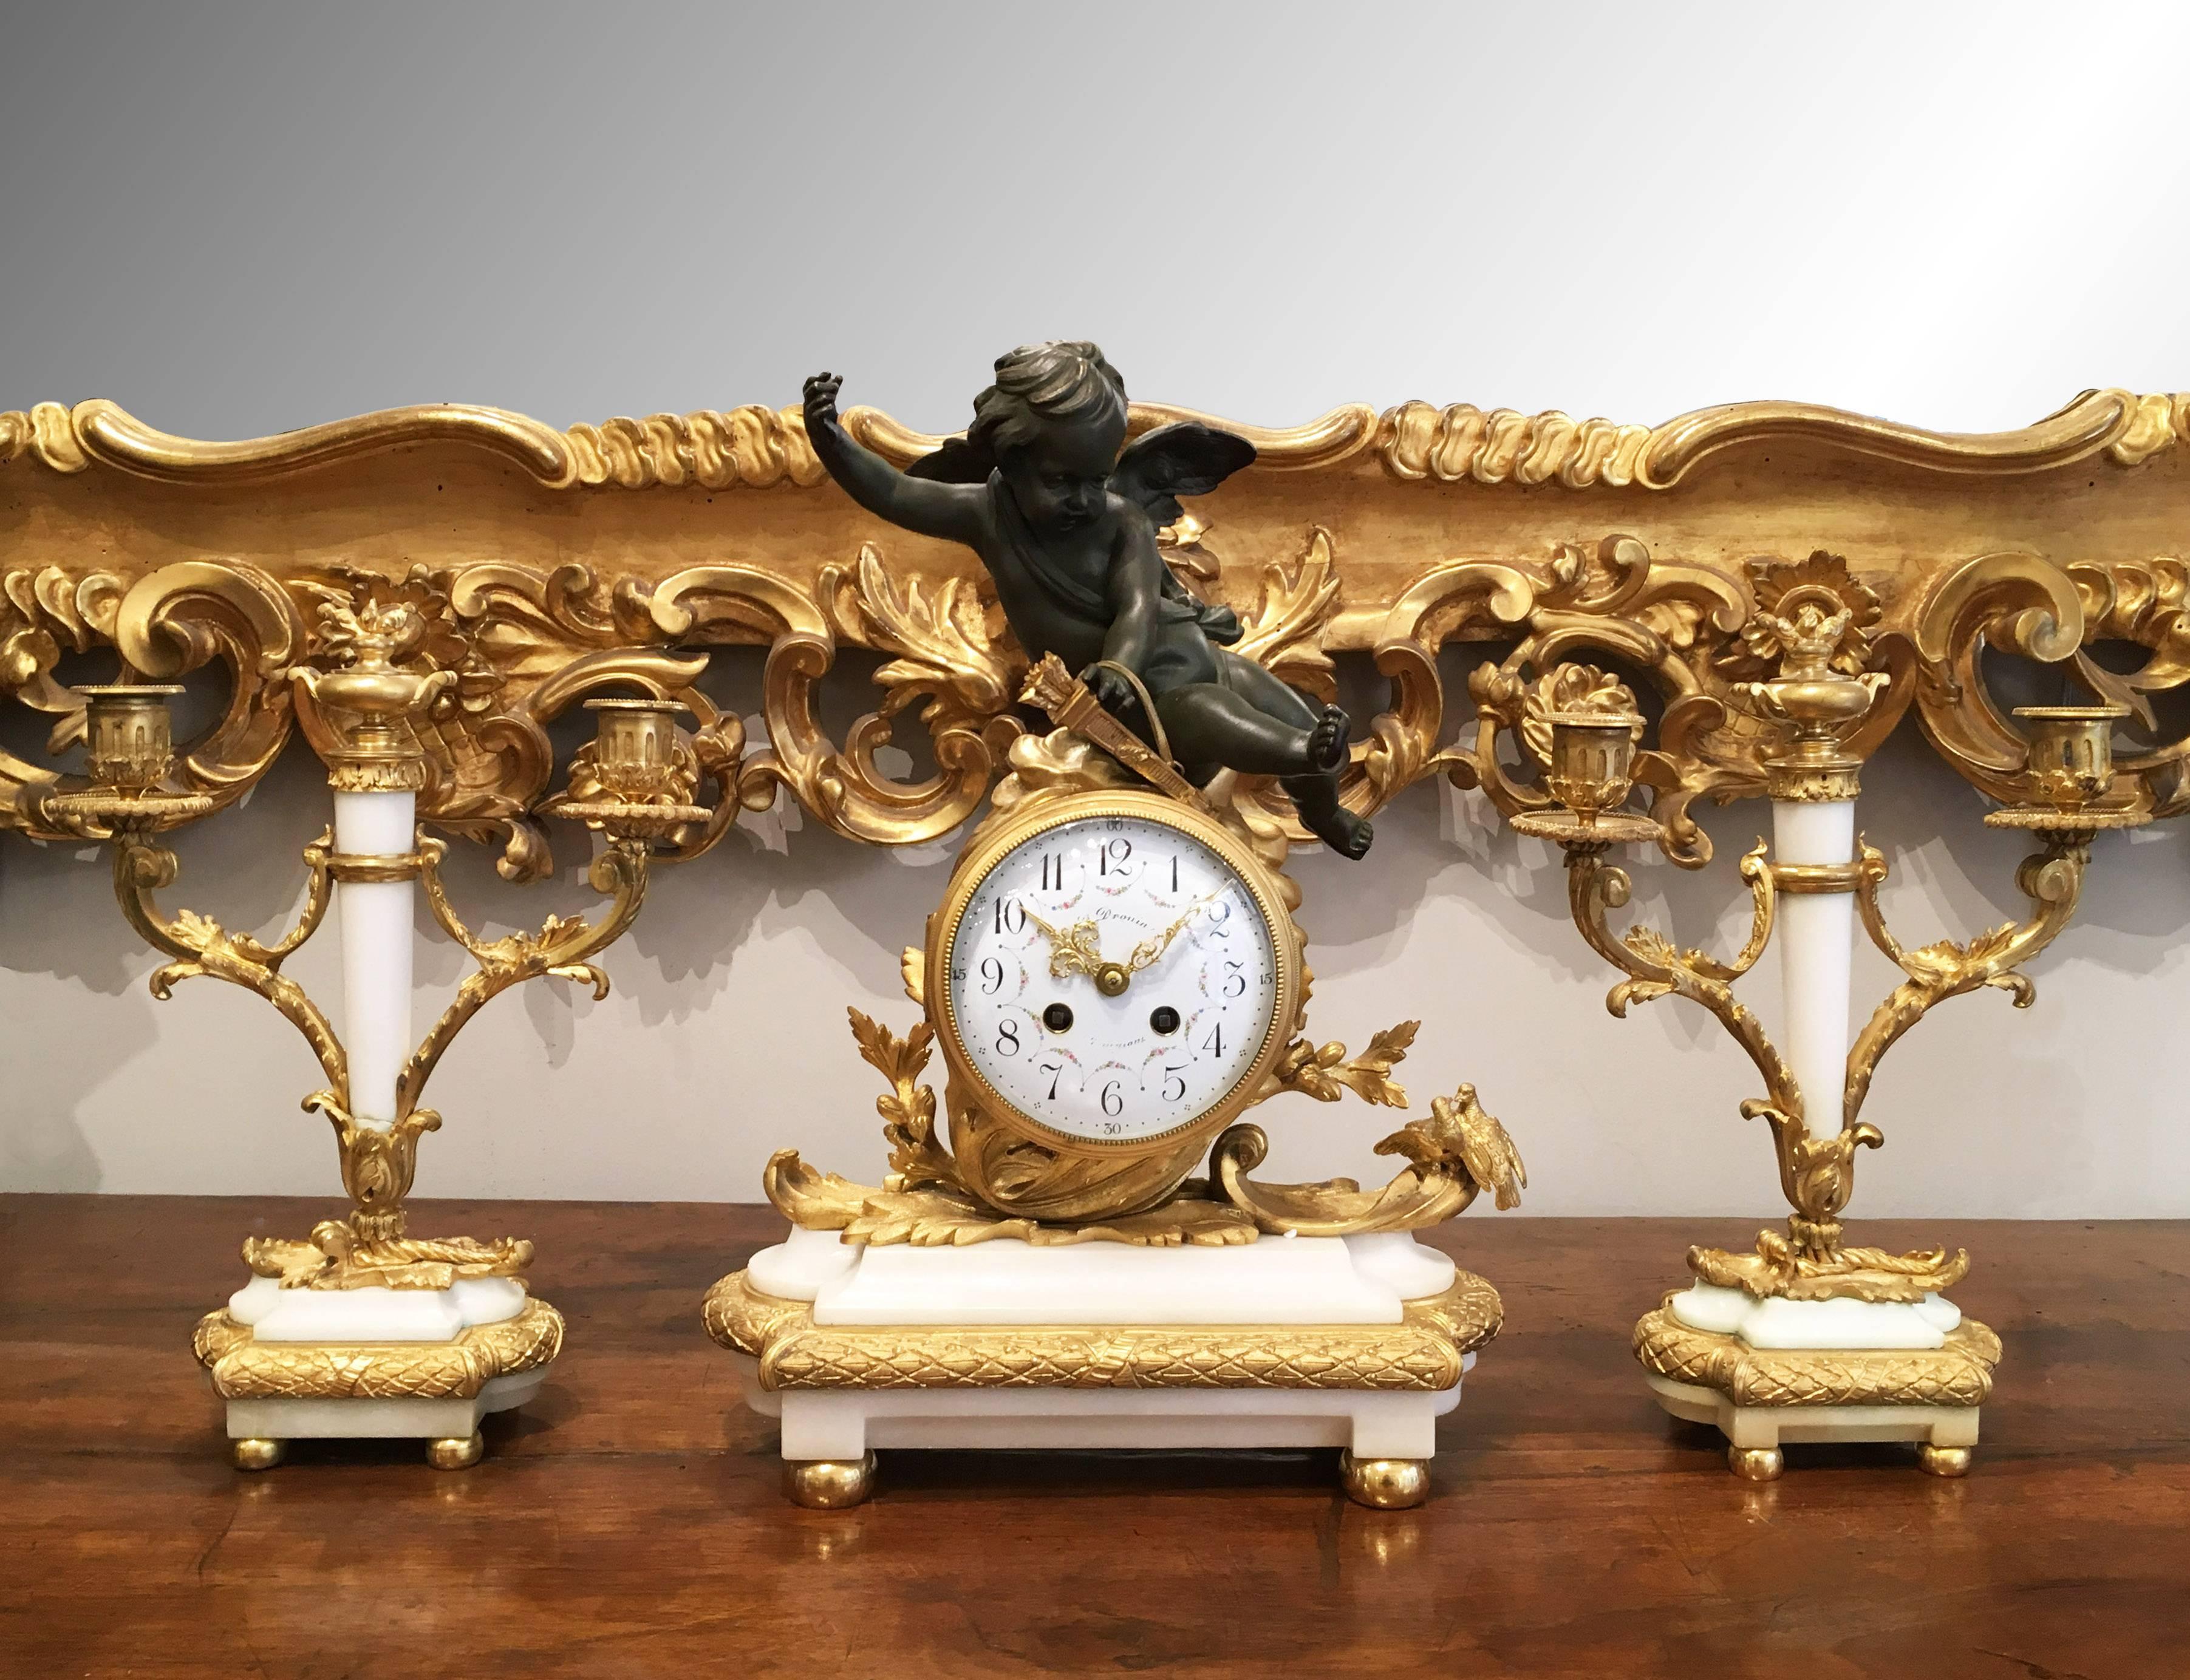 A superb French Napoleon III gilt bronze and white marble set clock set comprising of a pair of two branch candelabras and a mantel clock. The clock is adorned by two love-birds and a patinated bronze cupid and presents a white enamelled dial